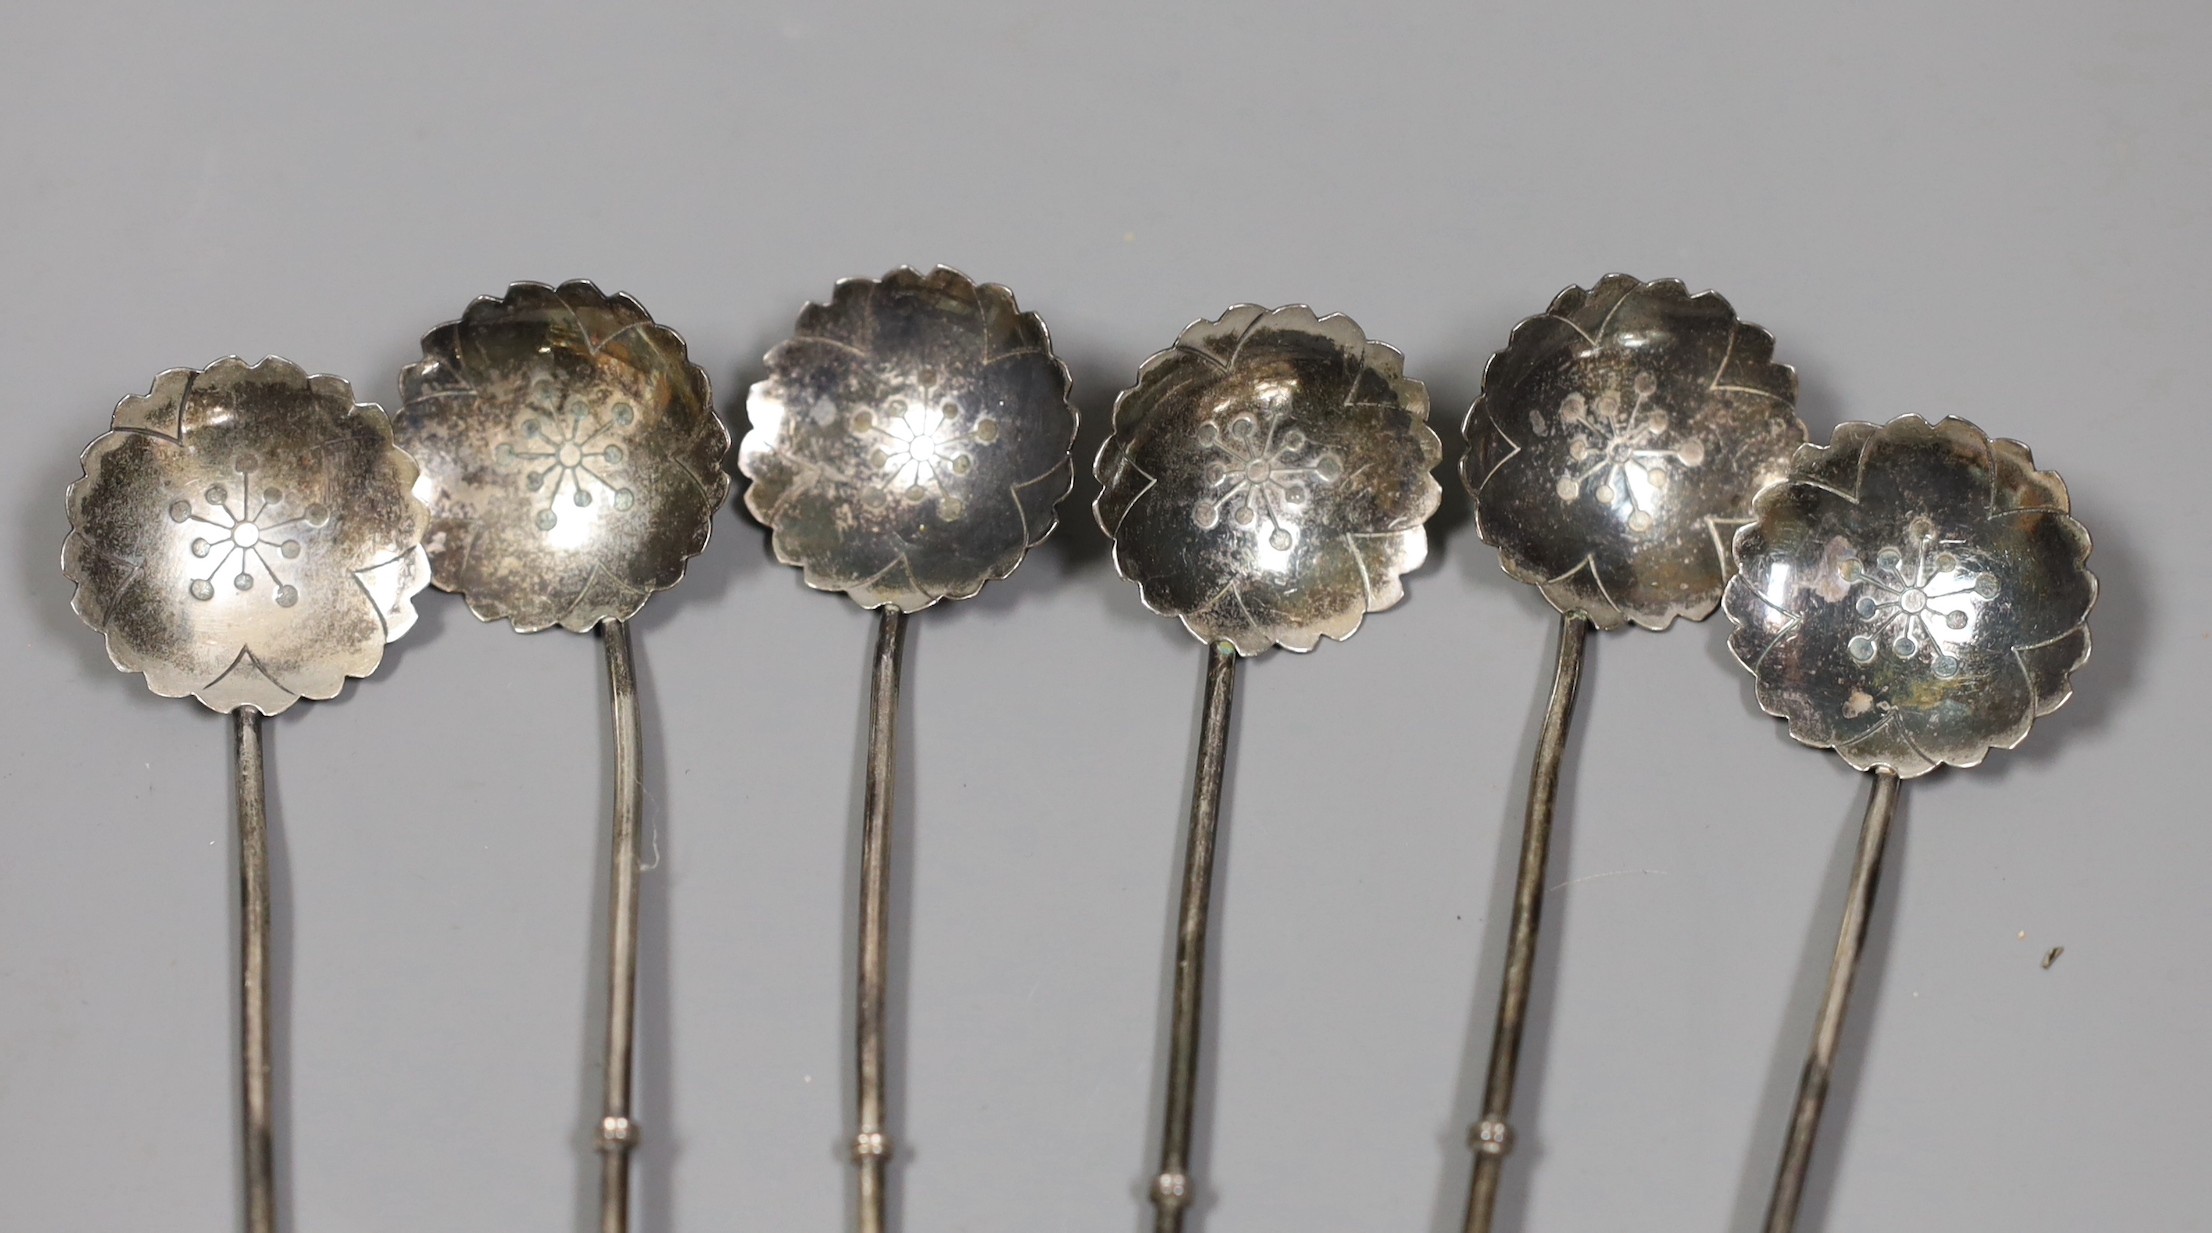 A set of six Japanese sterling iced teaspoons, 19.5cm, with differing terminals, 48 grams.